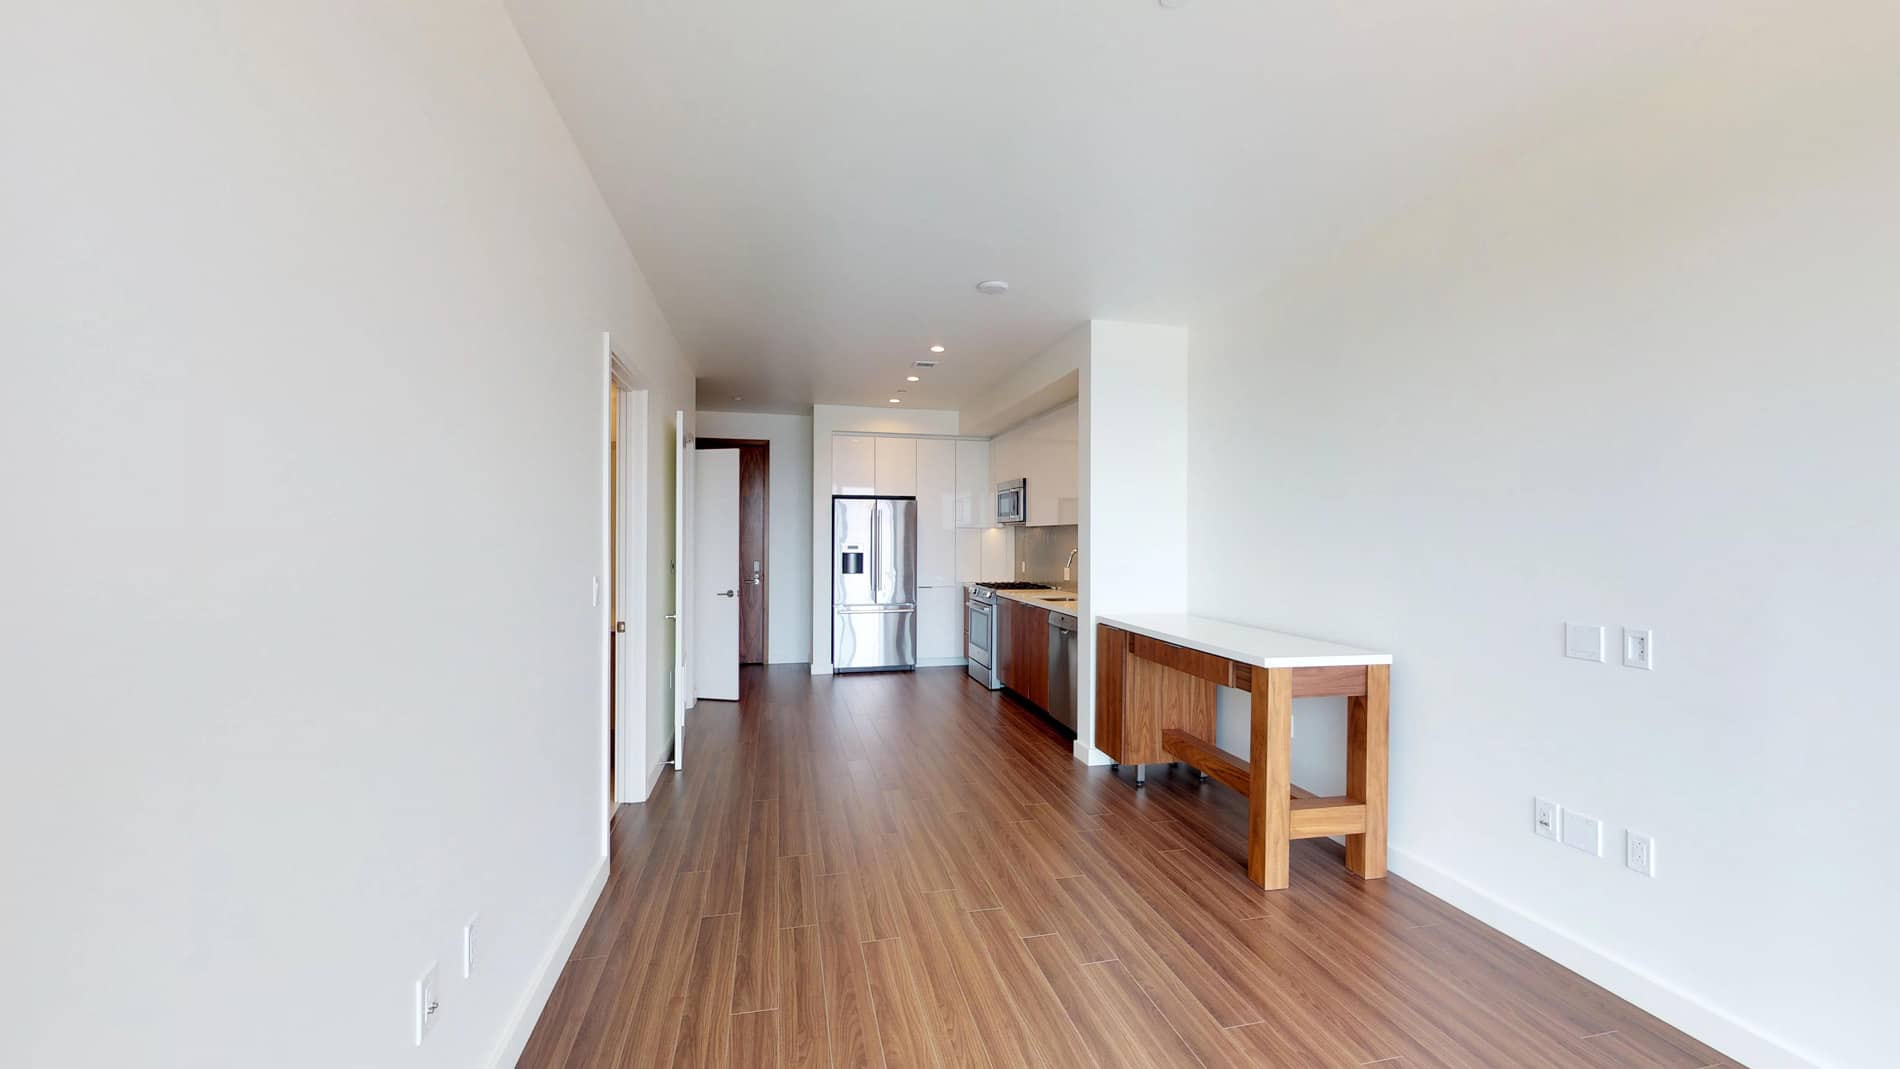 21 Amazing How Much to Put Hardwood Floors In 1200 Sq Ft 2024 free download how much to put hardwood floors in 1200 sq ft of apartments pricing for vision on wilshire los angeles with regard to 16c03a65 9545 ffa4 e05e b2b0d6f1c3b4